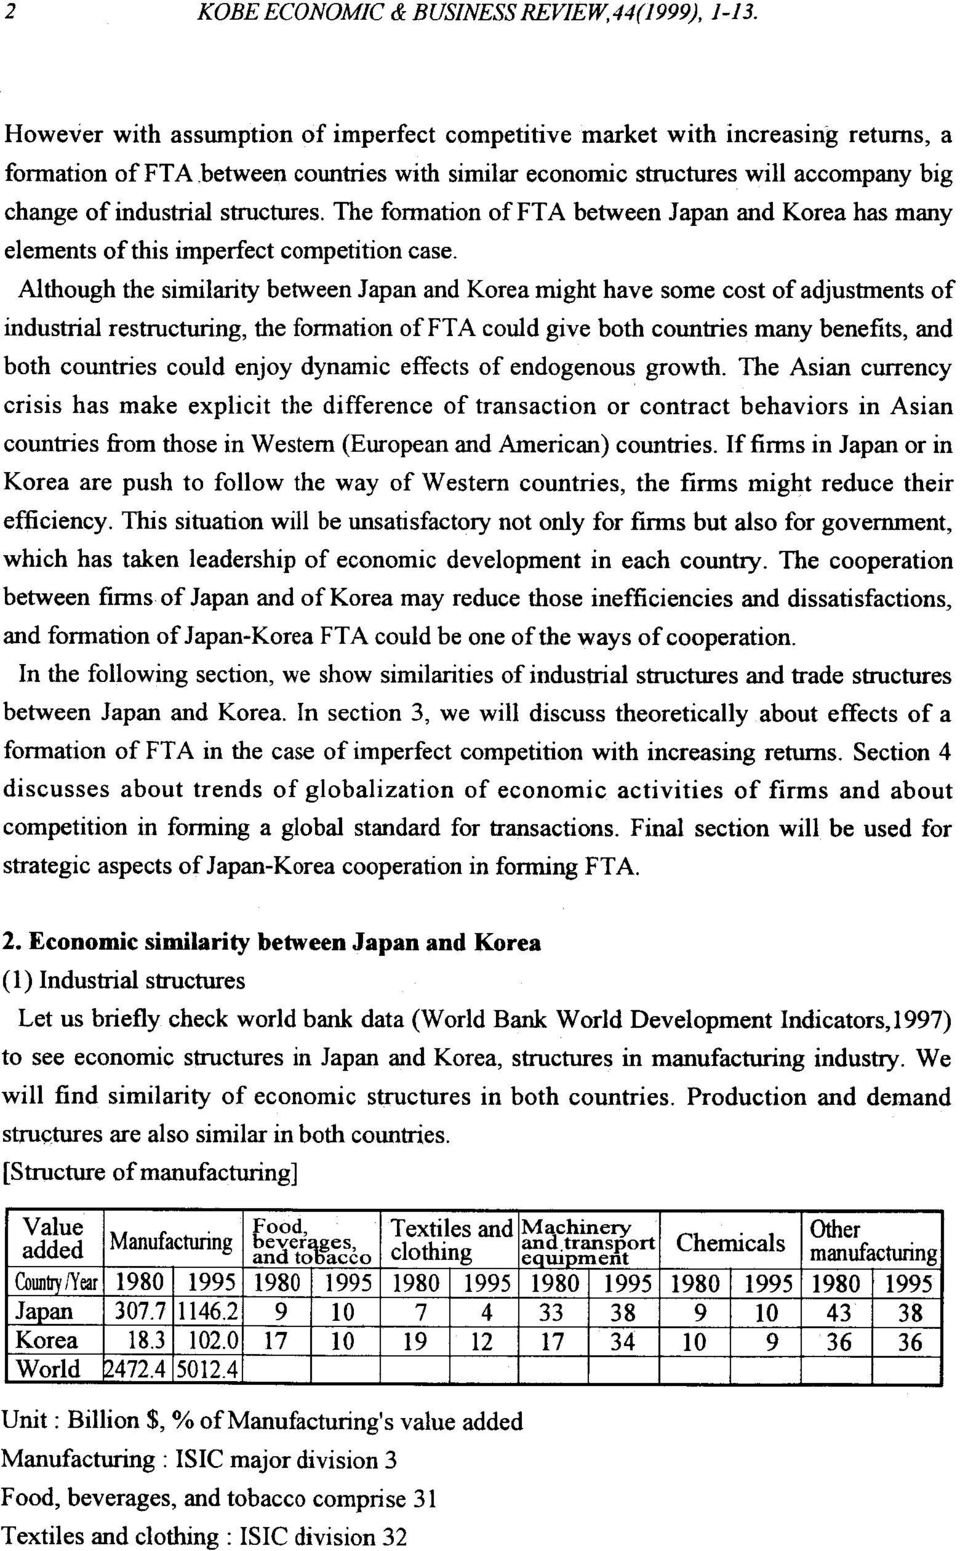 structures. The formation offta between Japan and Korea has many elements of this imperfect competition case.